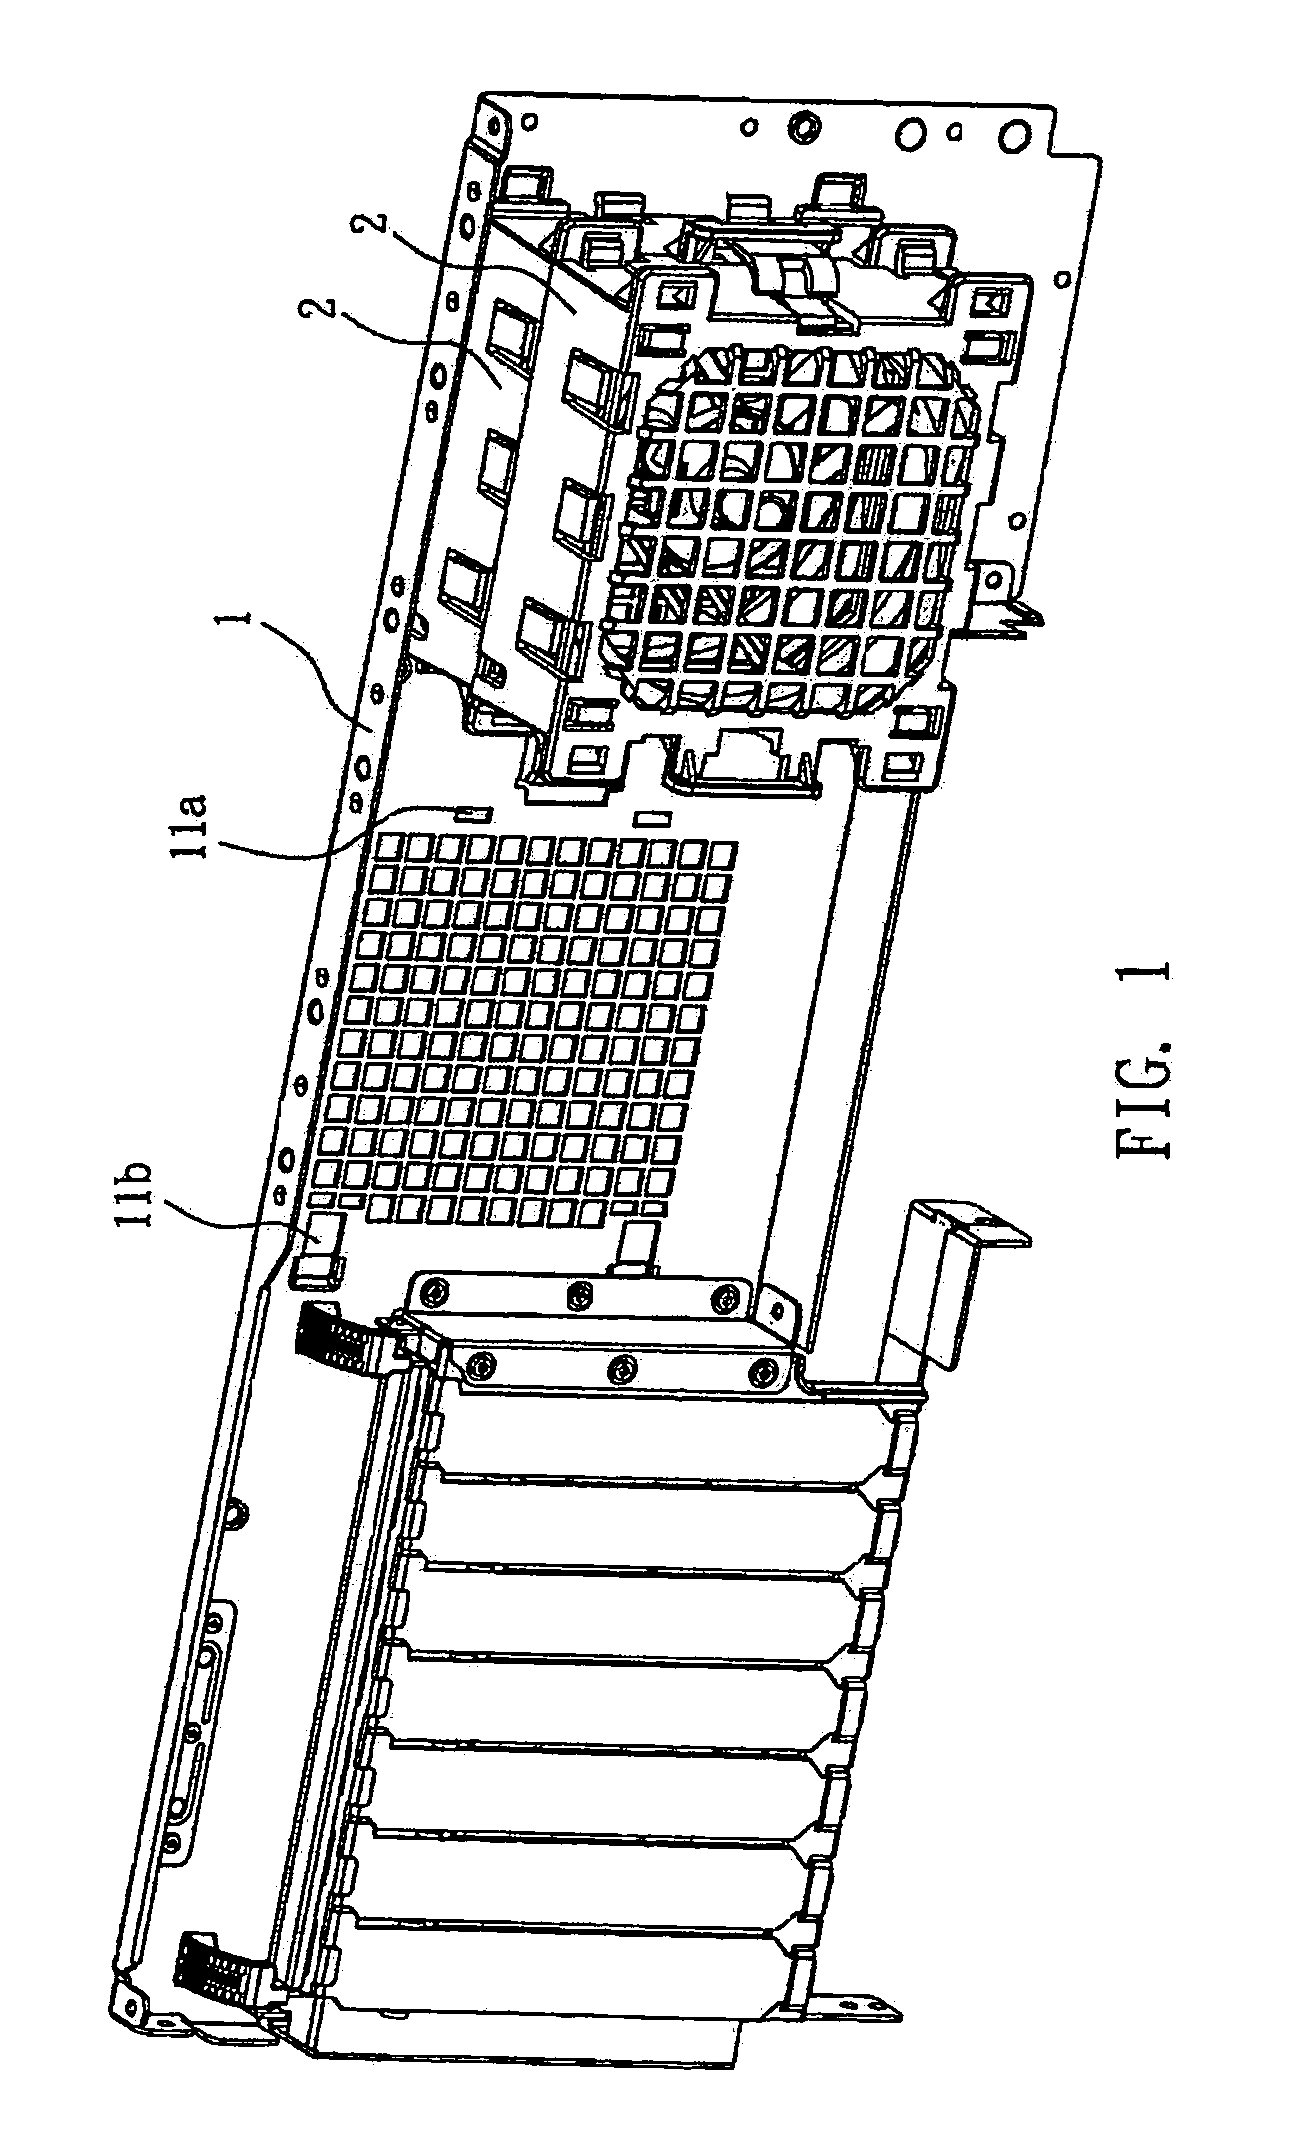 Heat dissipating structure applicable to a computer host